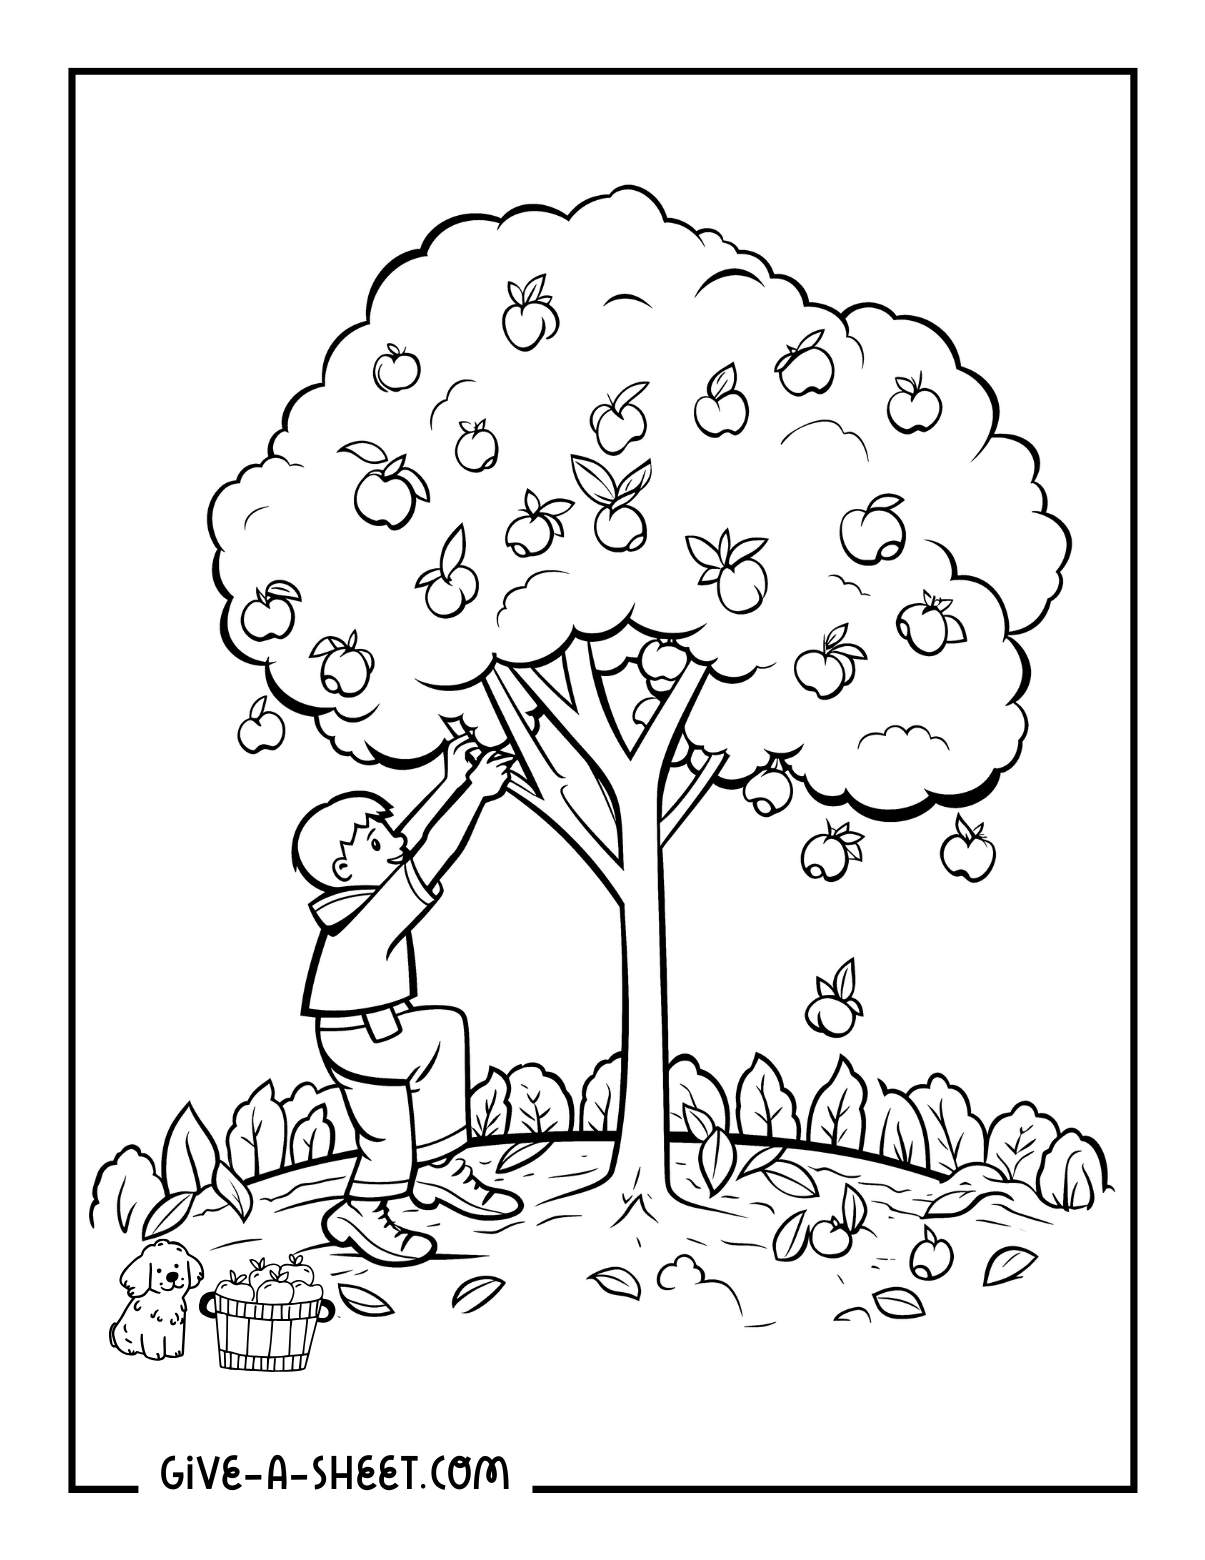 Toddler apple picking coloring page for young kids.